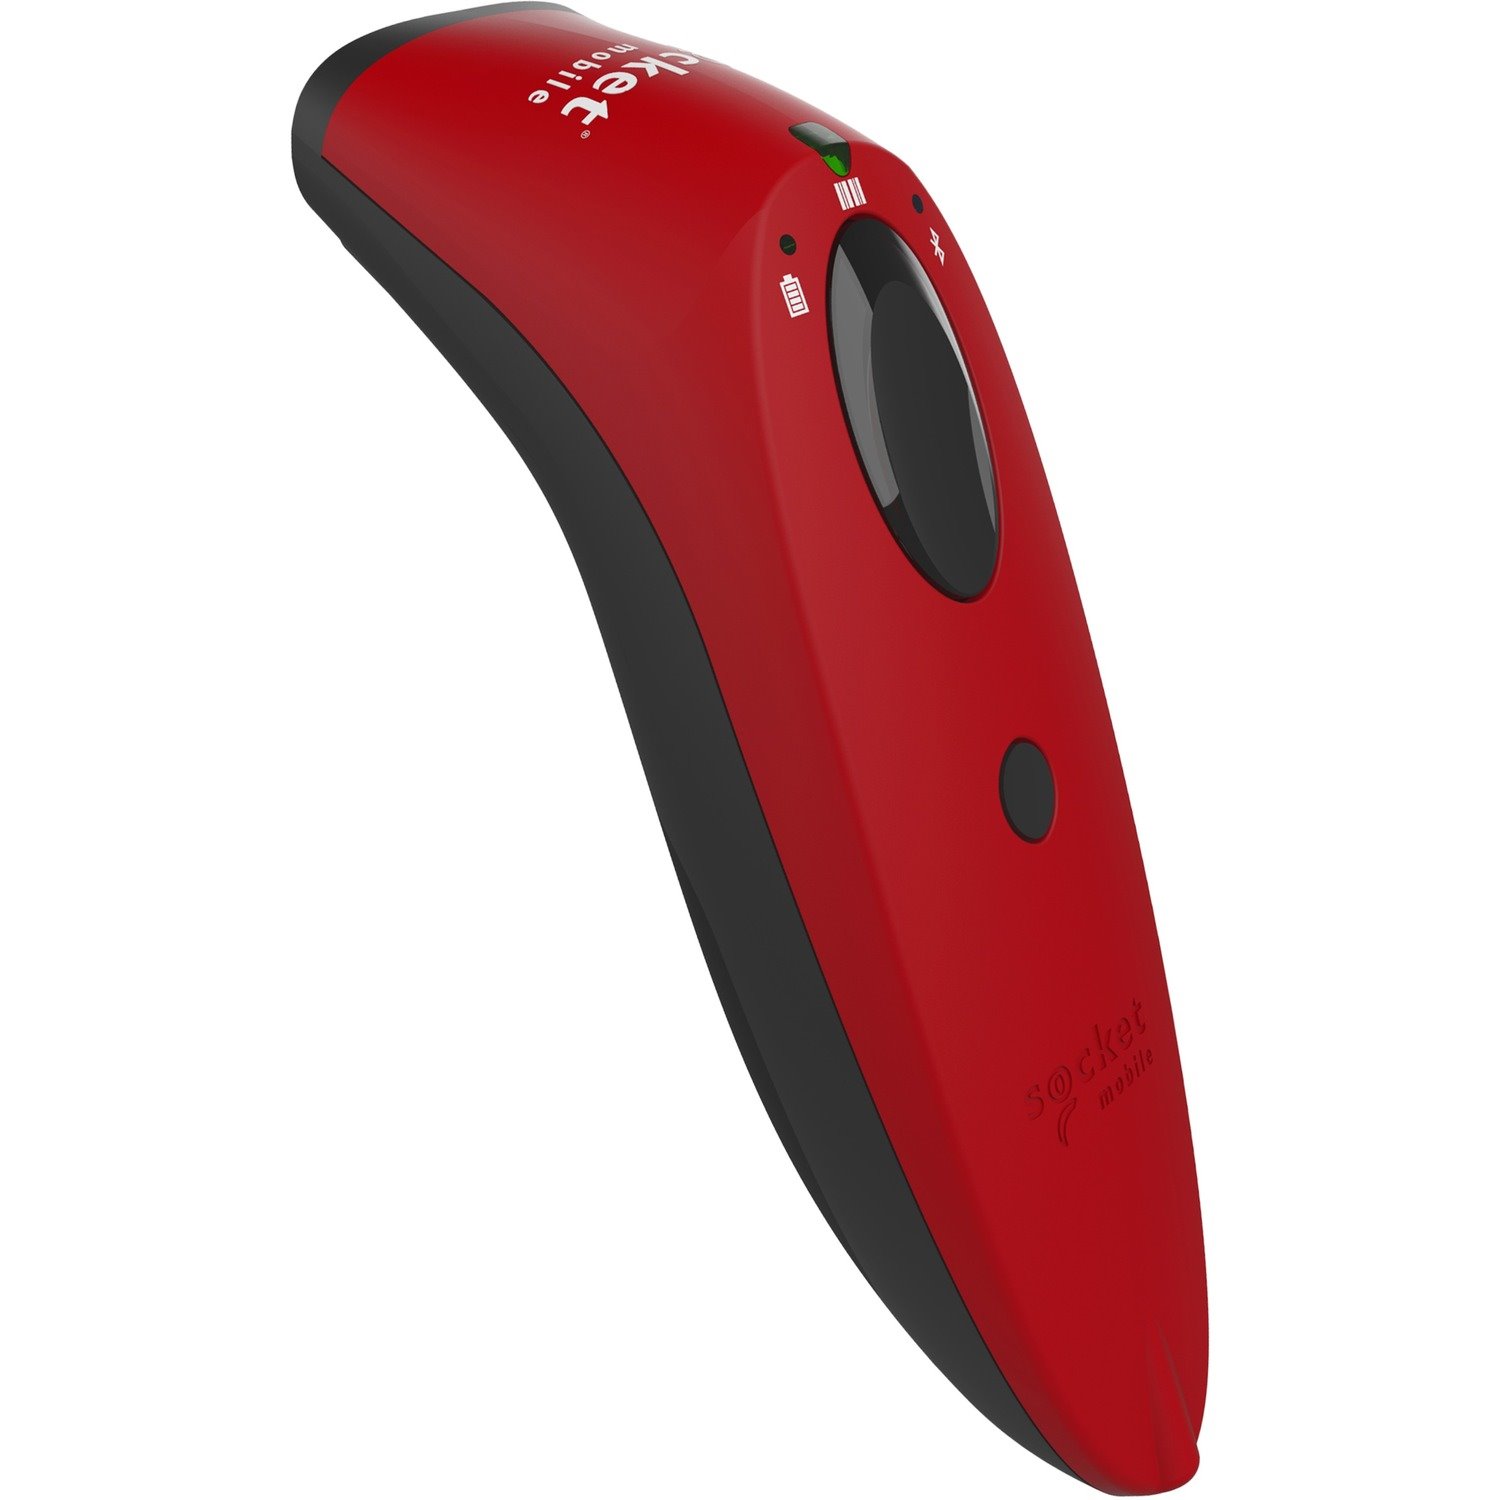 Socket Mobile SocketScan S720 Handheld Barcode Scanner - Wireless Connectivity - Red